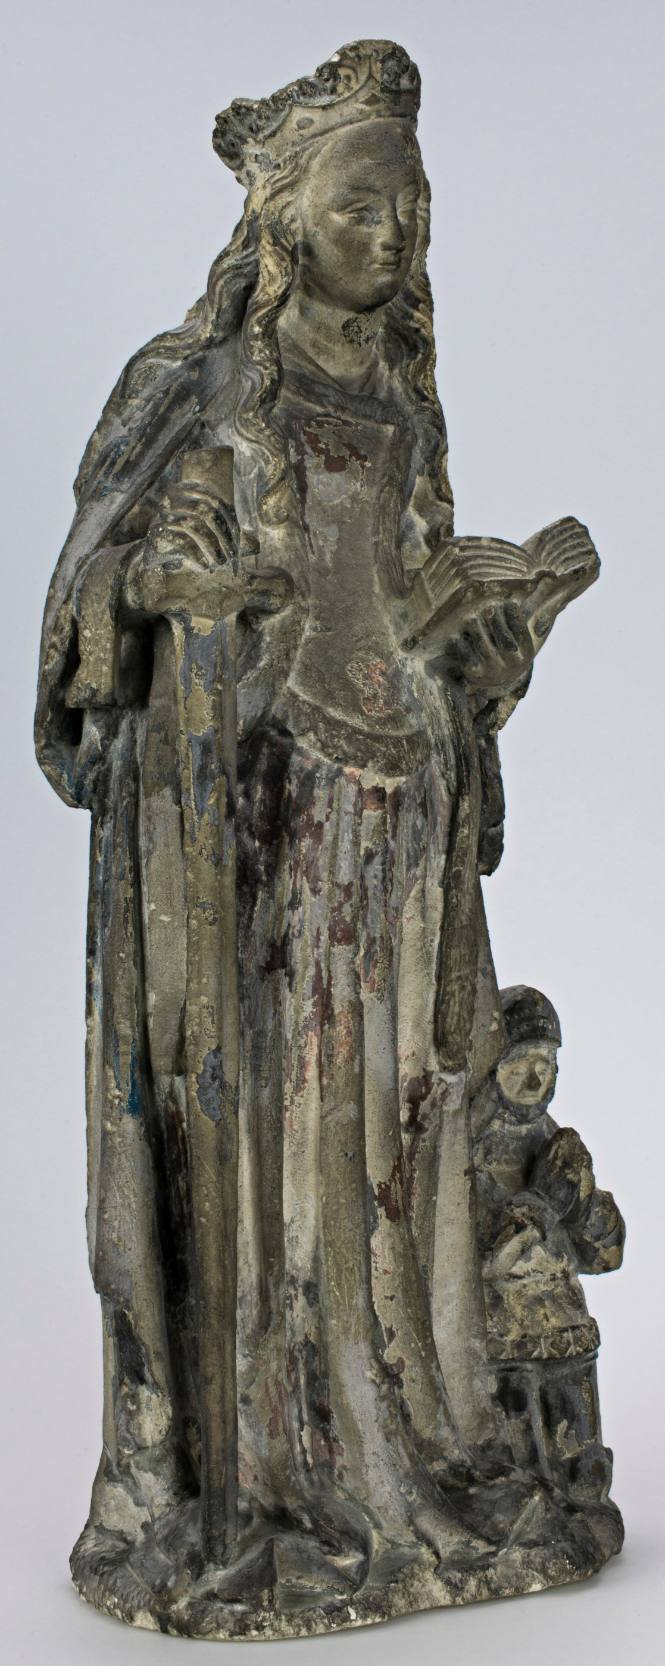 St. Catherine of Alexandria with a Kneeling Knight